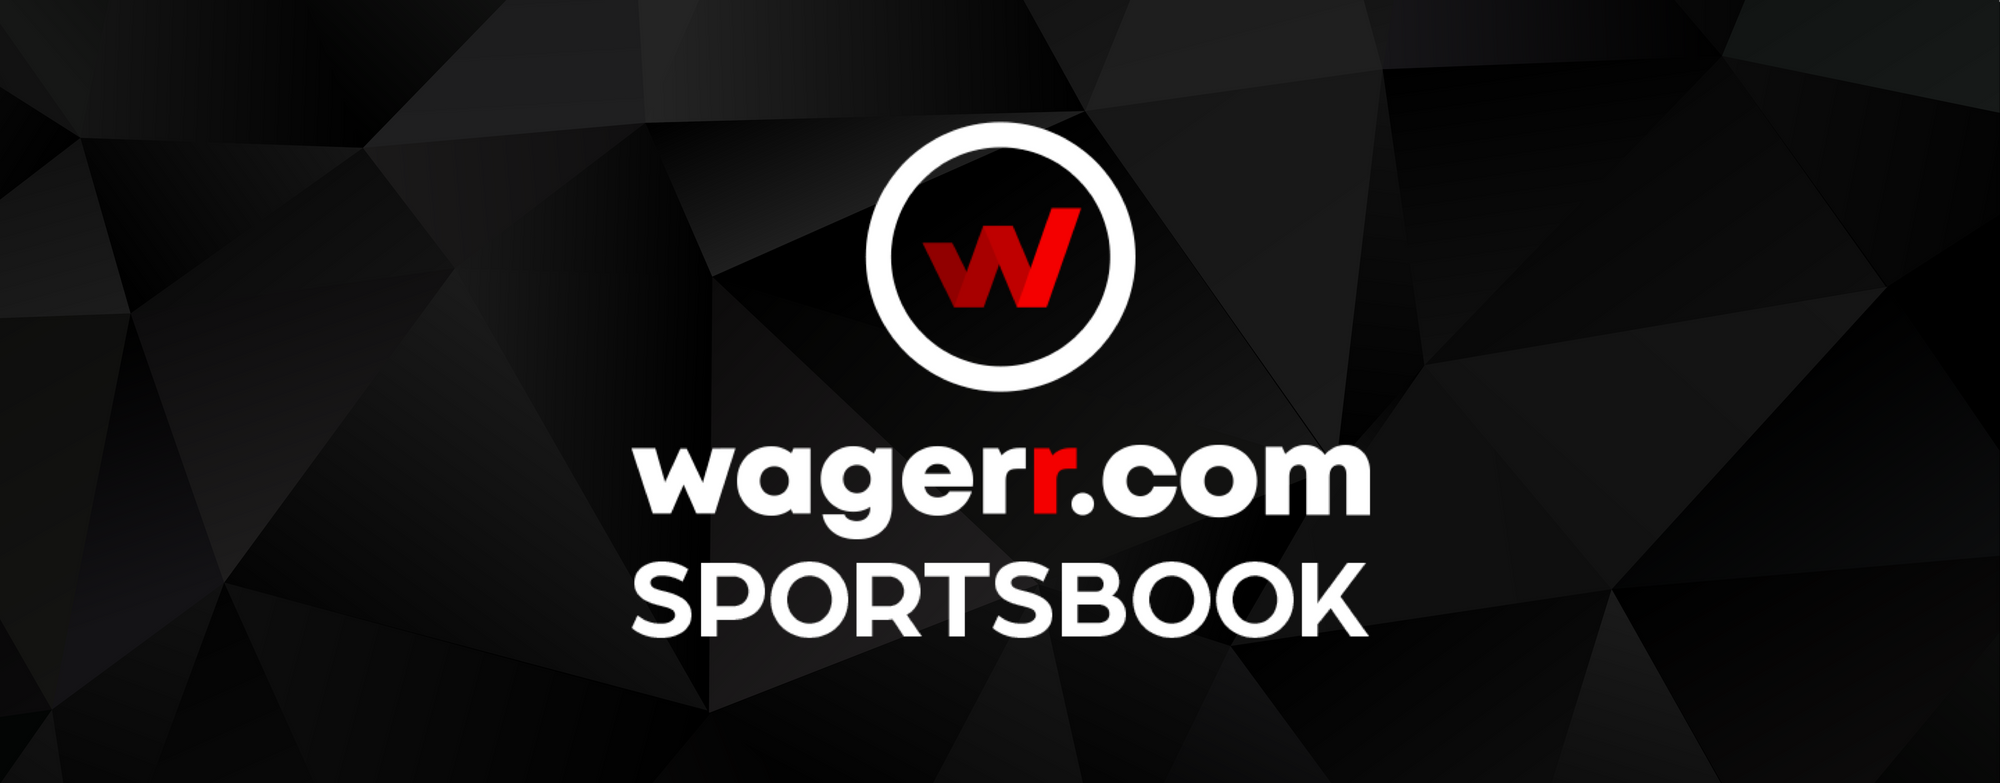 Wagerr Sportsbook is live!